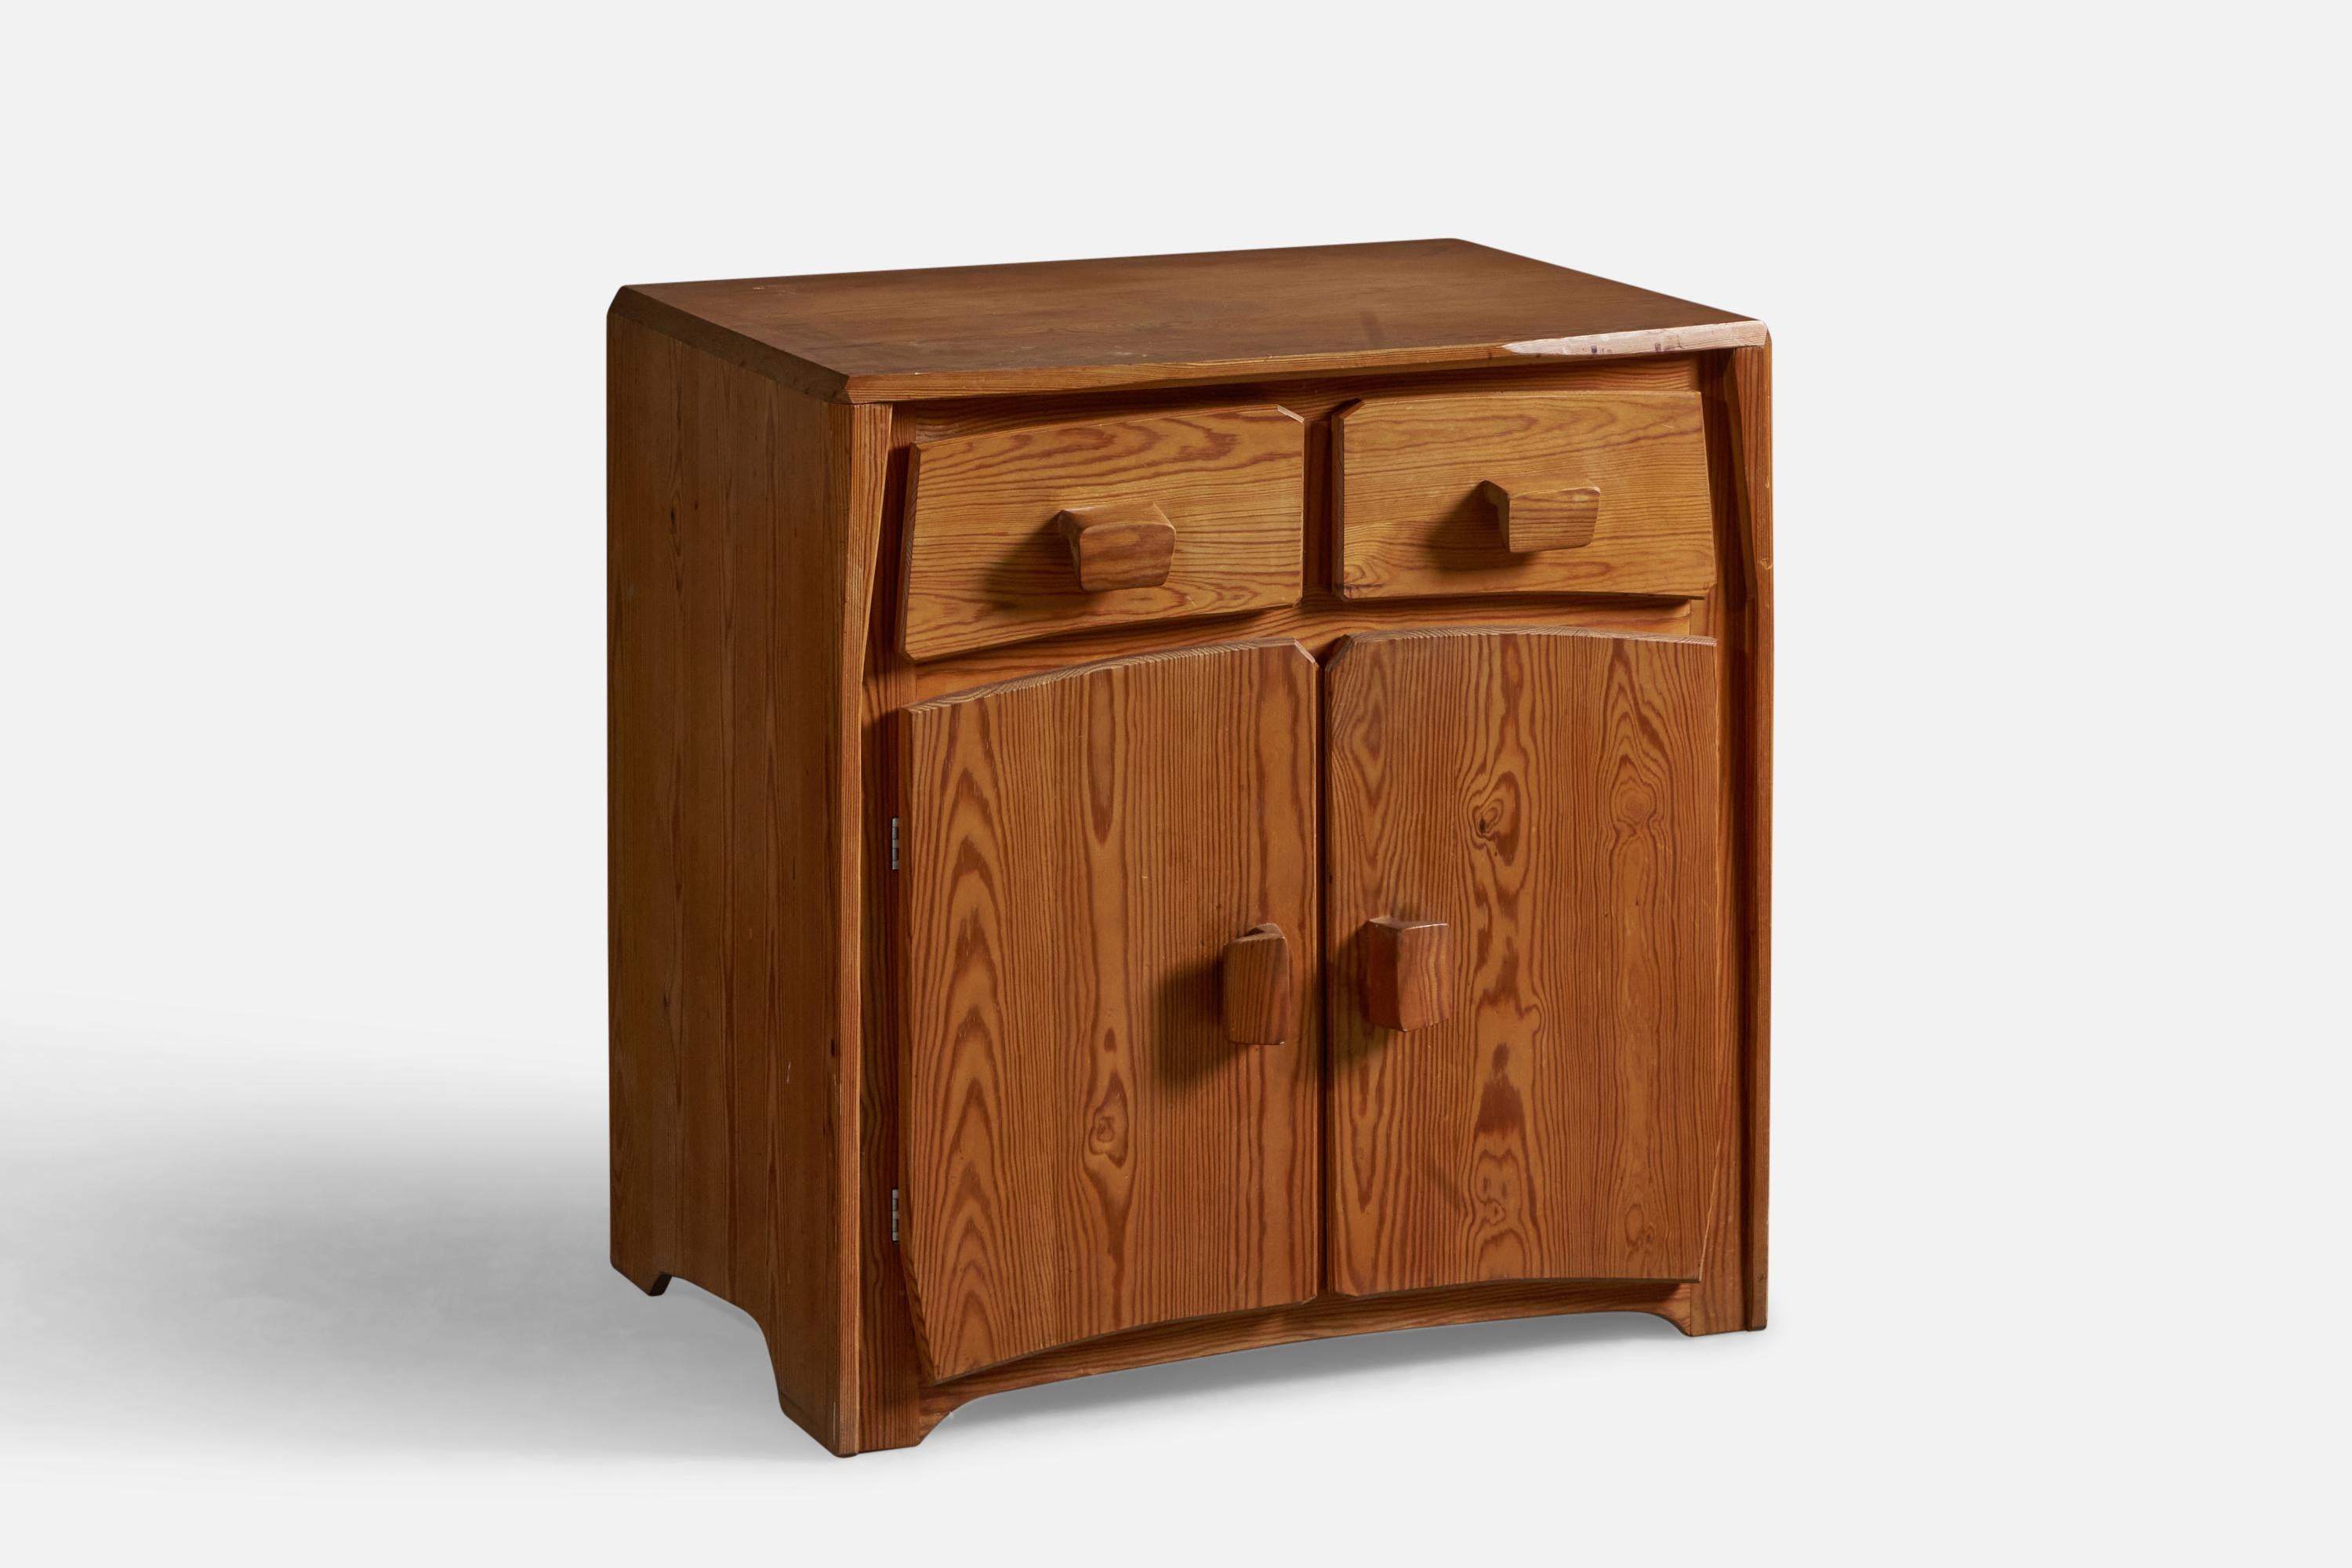 A pine cabinet or chest of drawers, designed and produced in Switzerland, c. 1930s.